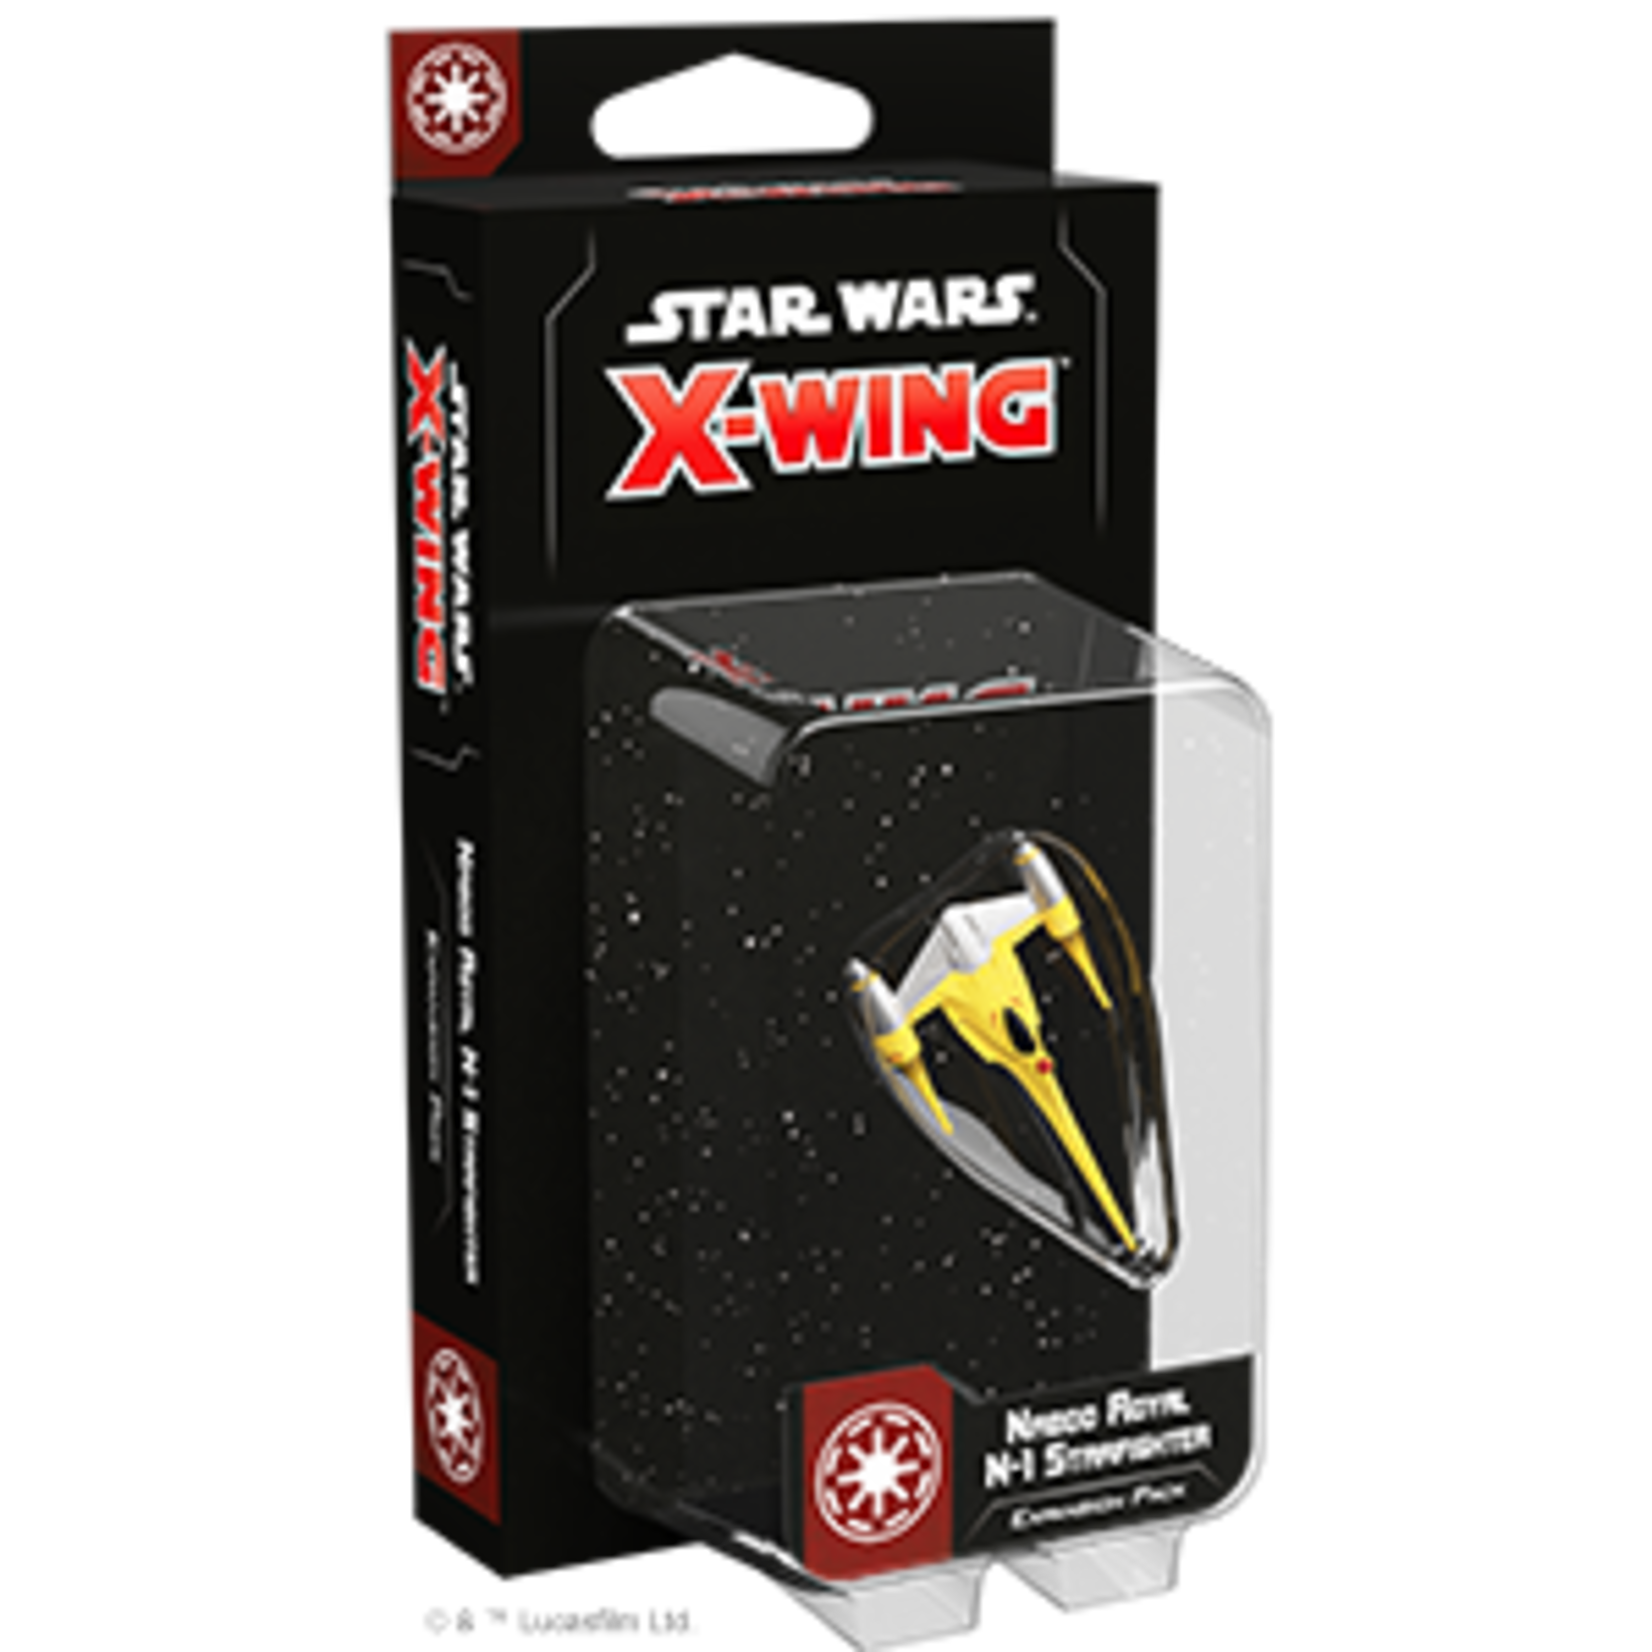 Fantasy Flight Games Star Wars X-Wing: 2nd Edition - Naboo Royal N-1 Starfighter Expansion Pack